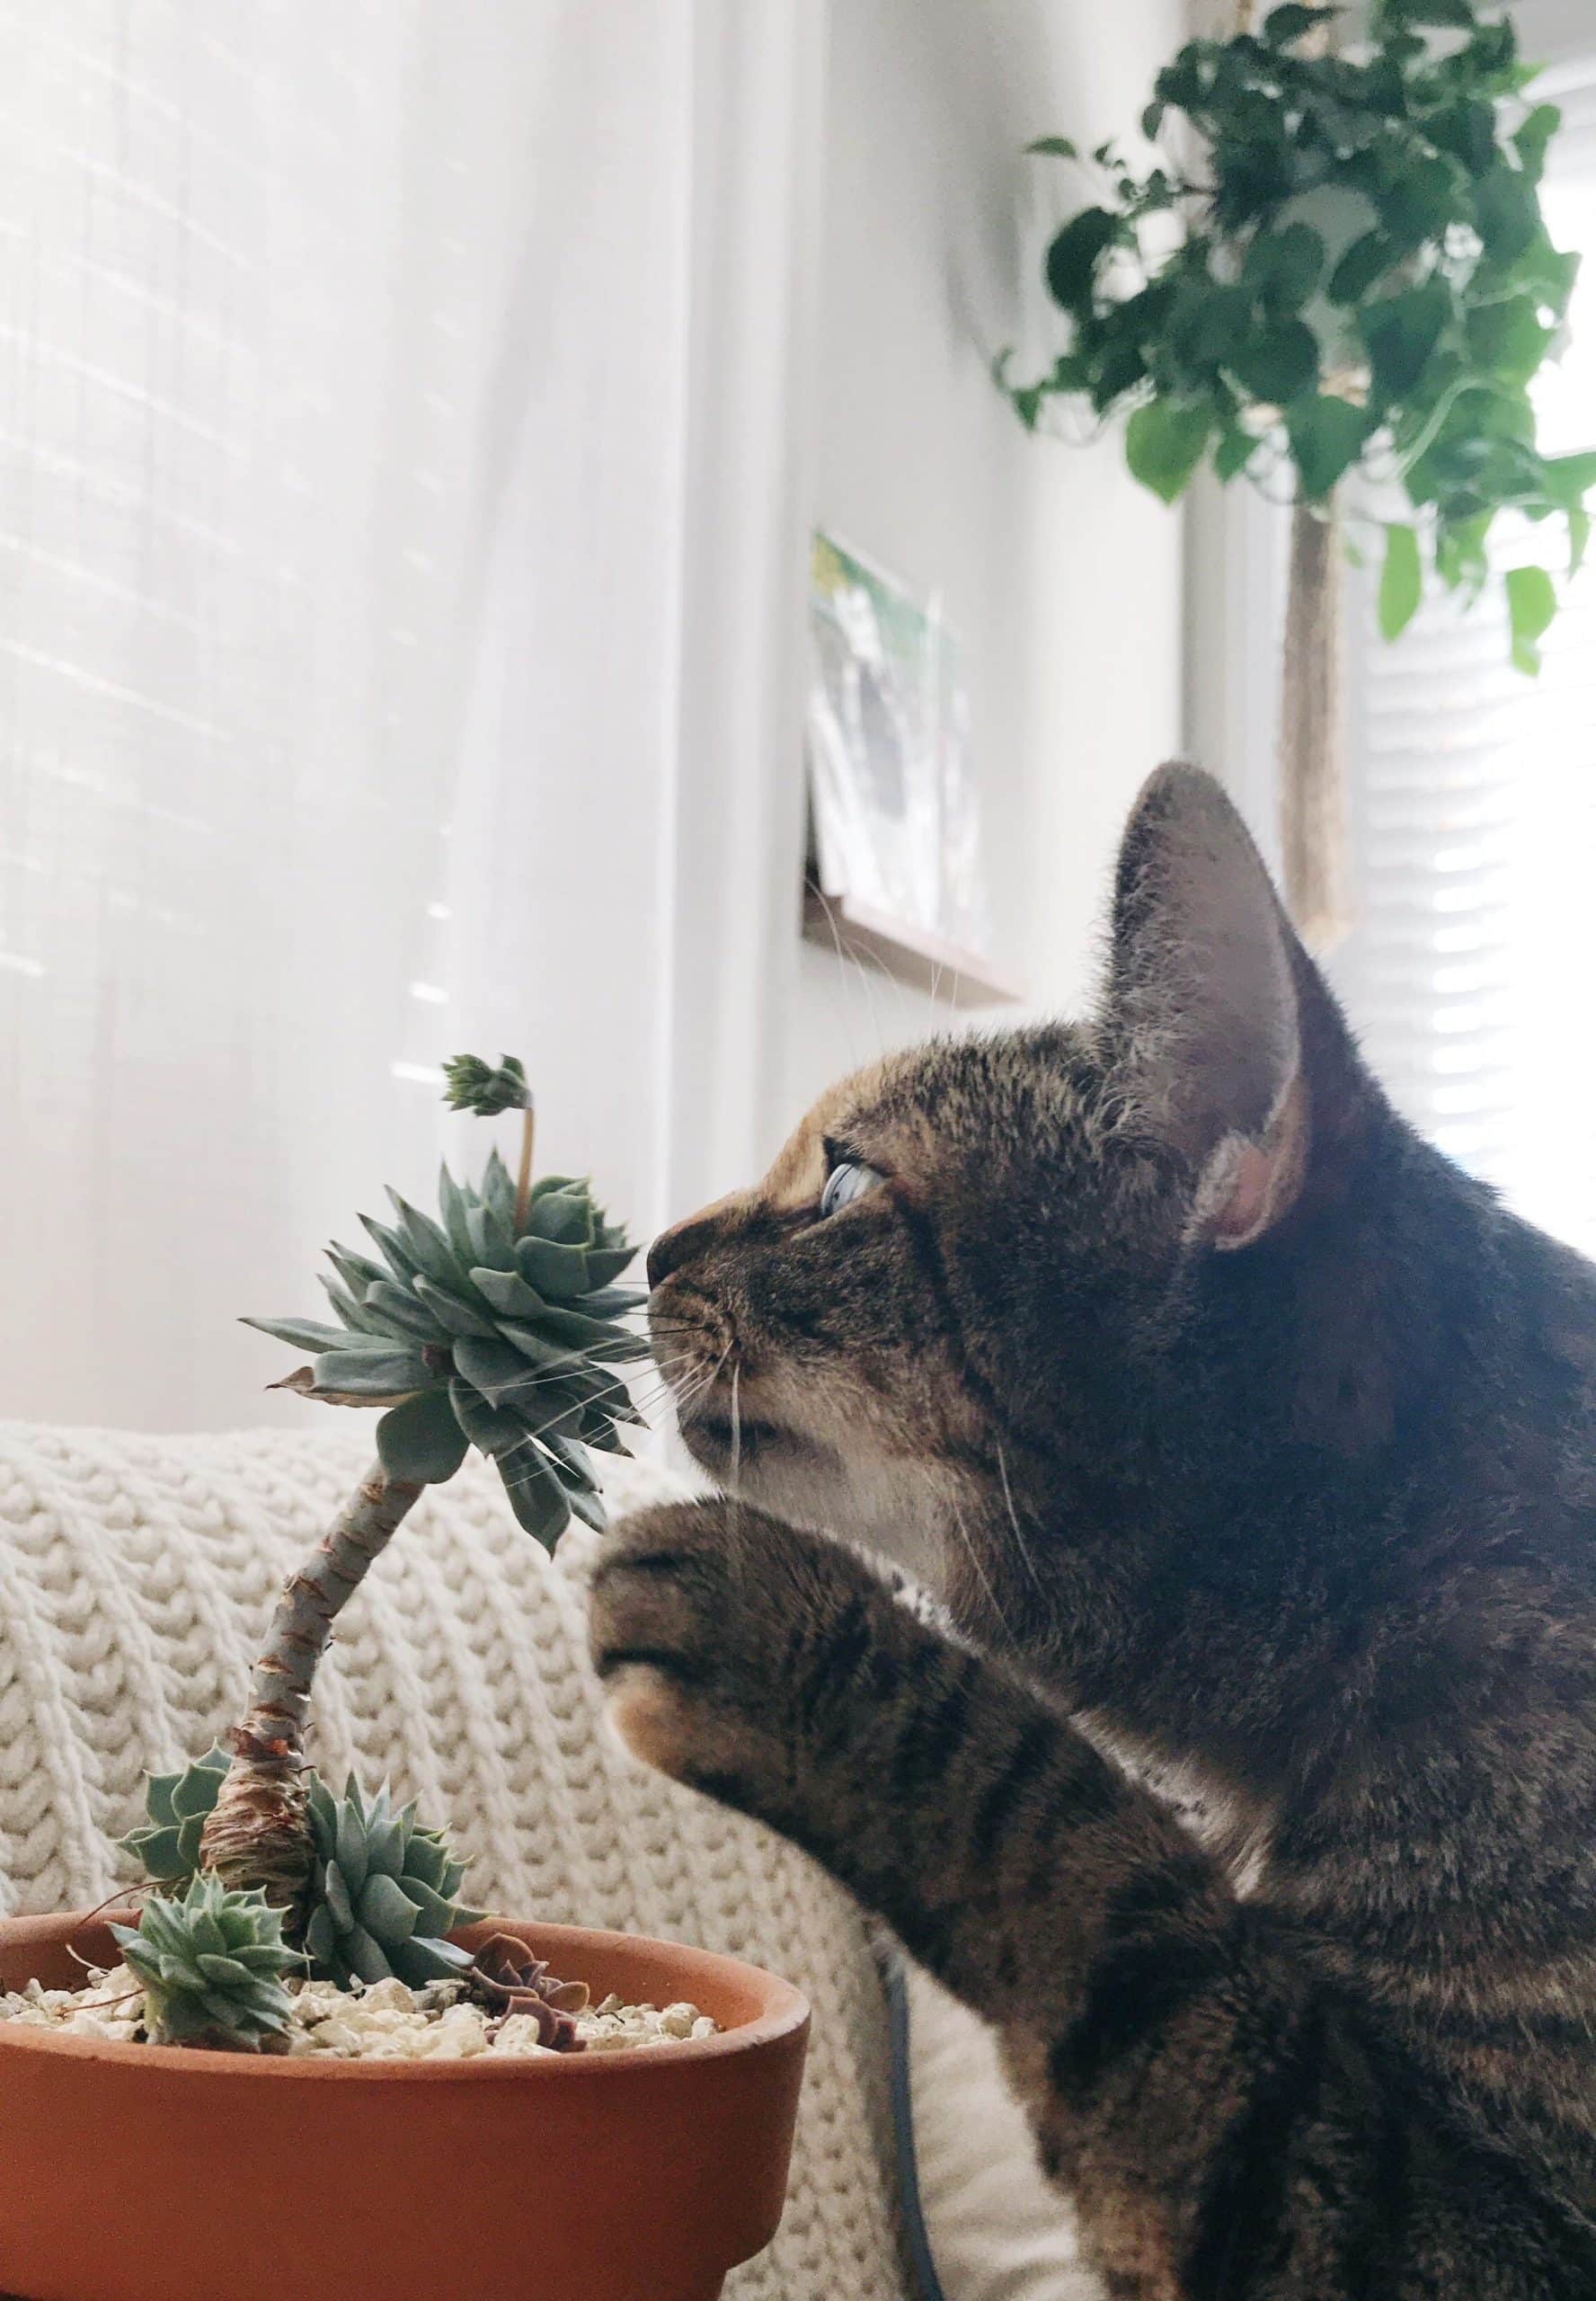 Are Cactuses Poisonous To Cats?